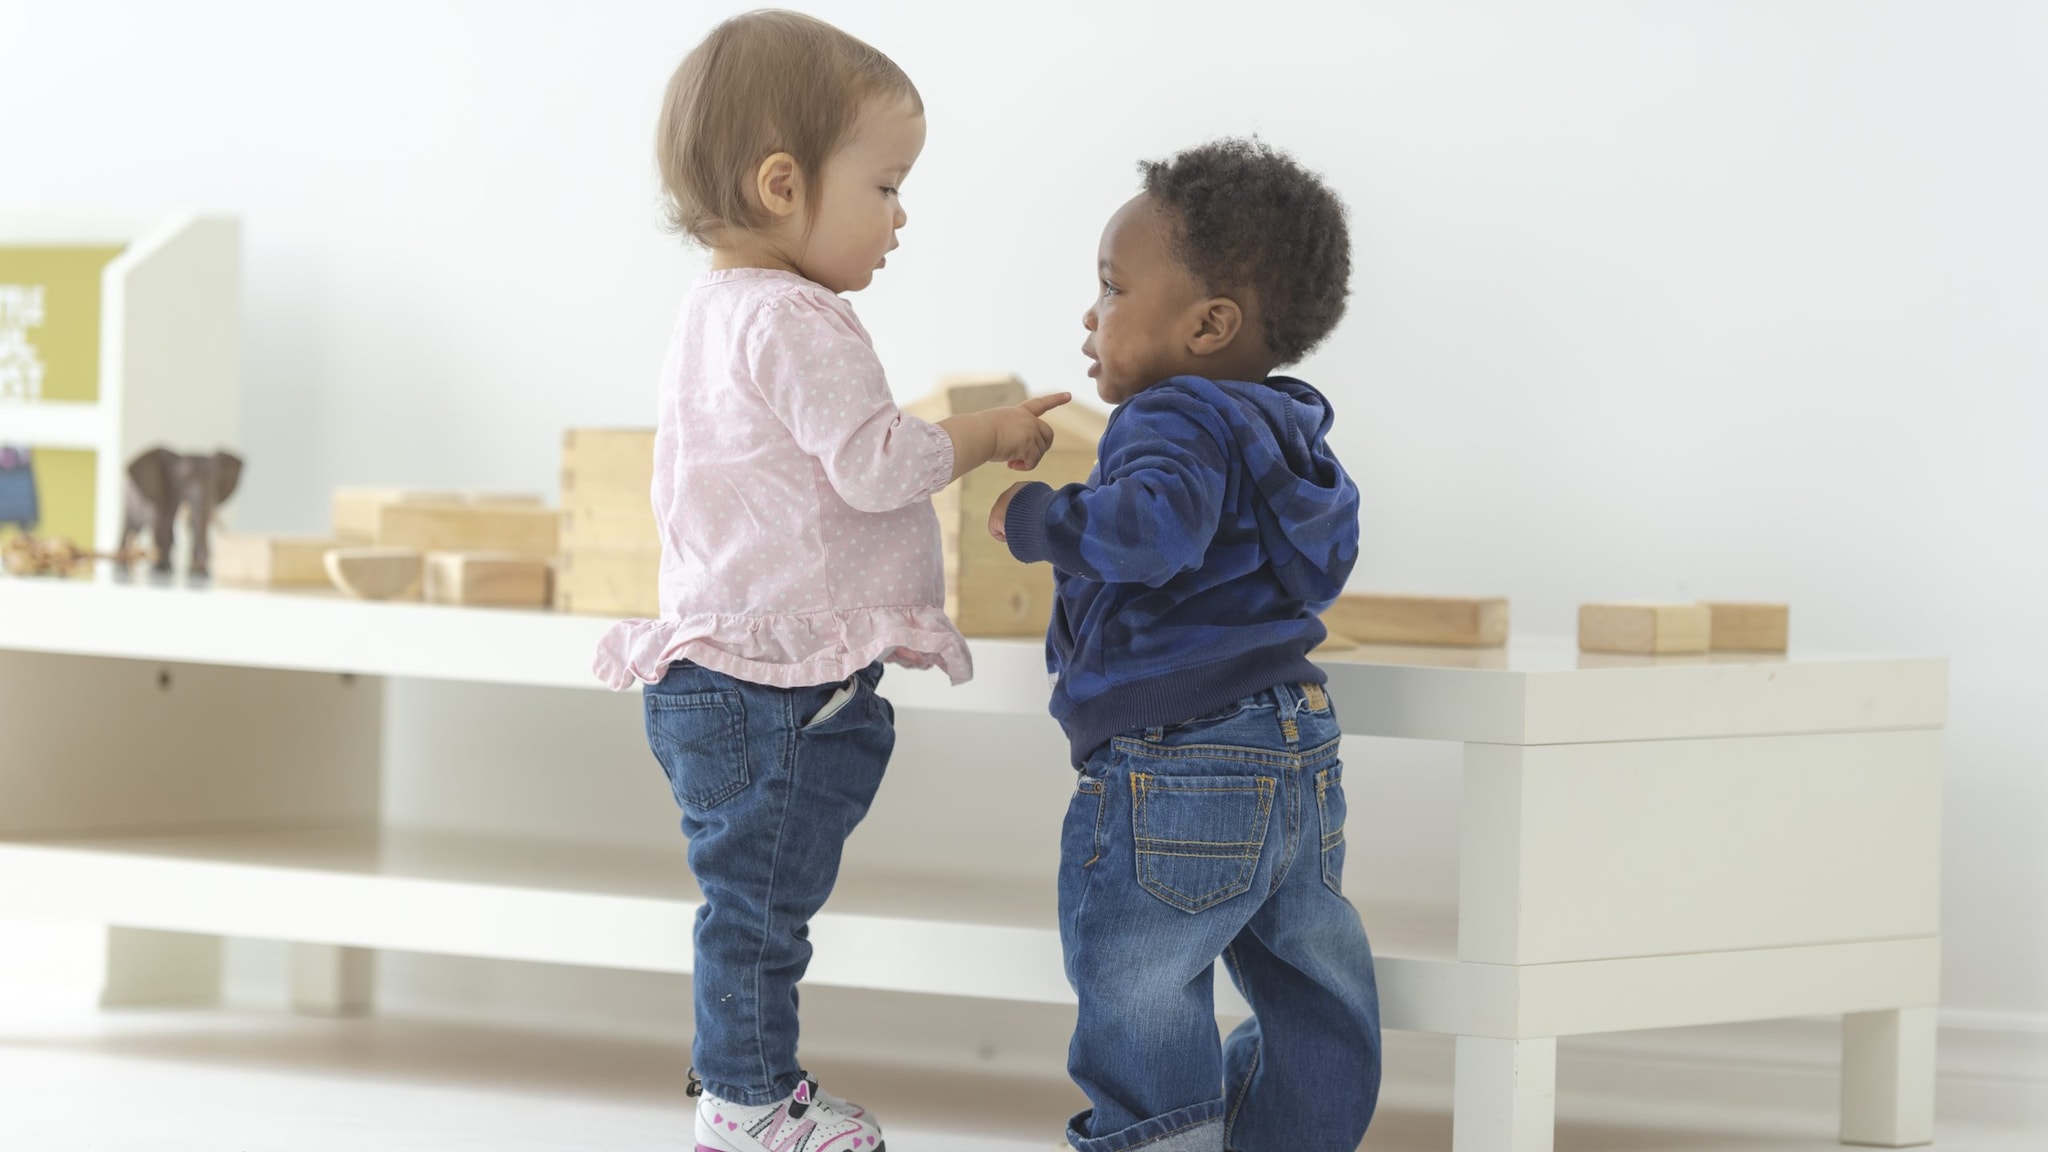 Two toddlers talking in an early care and education classroom.